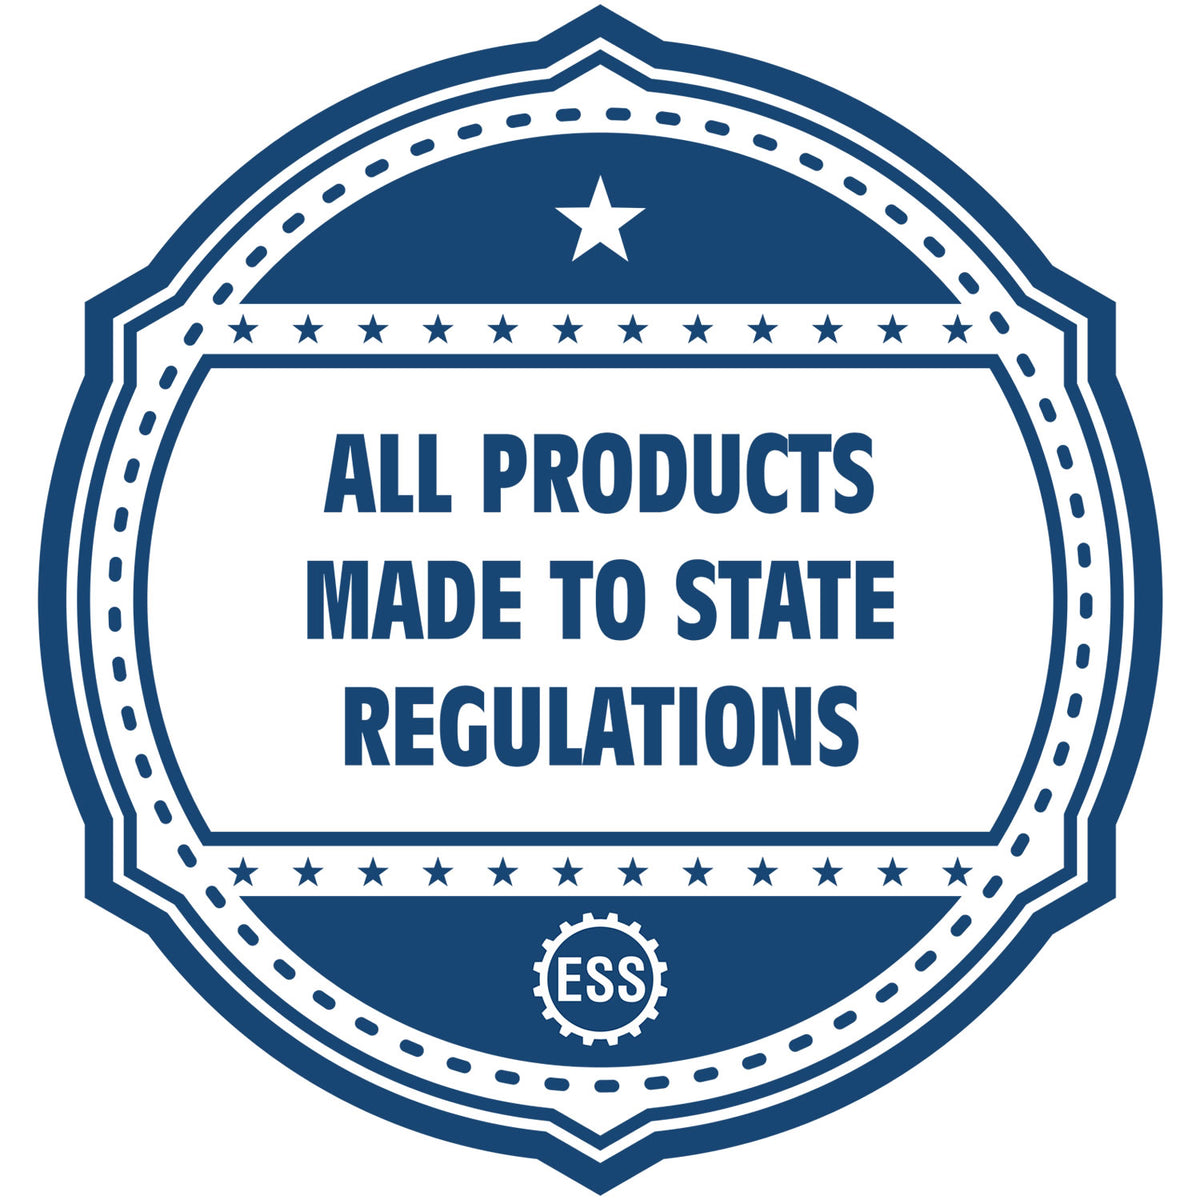 An icon or badge element for the New Hampshire Desk Architect Embossing Seal showing that this product is made in compliance with state regulations.